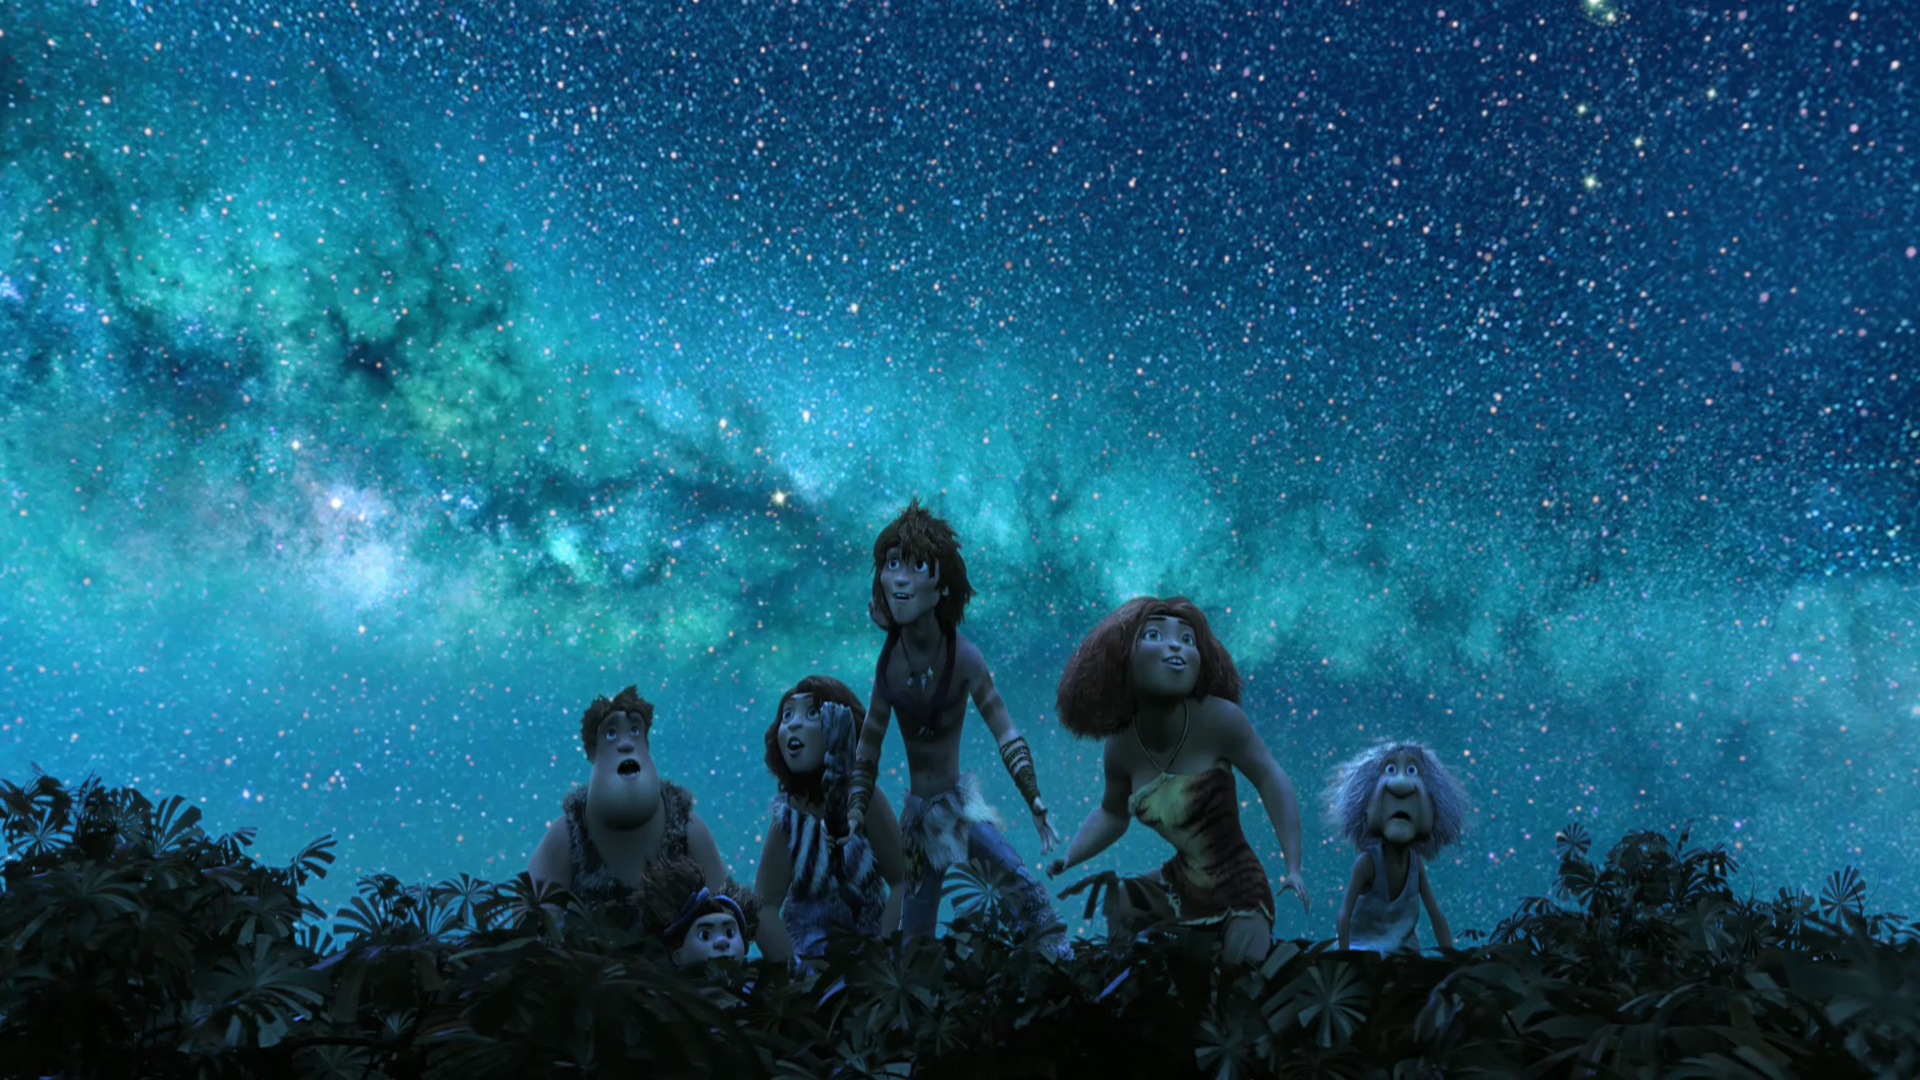 V Croods HD Movie Wallpapers #16 - 1920x1080